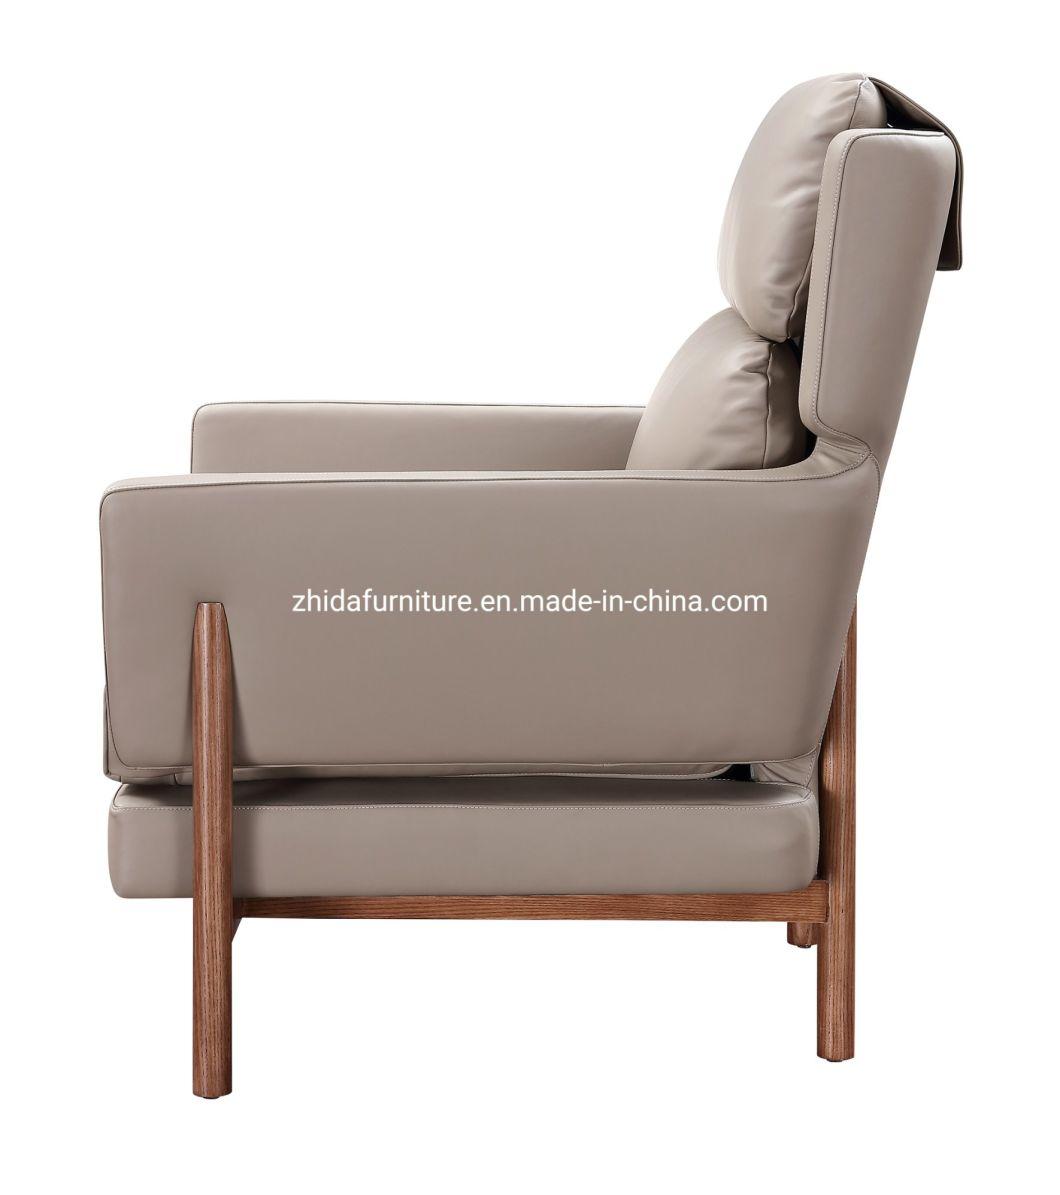 Chinese Modern Furniture Home Chair Living Room Chair Leather Chair